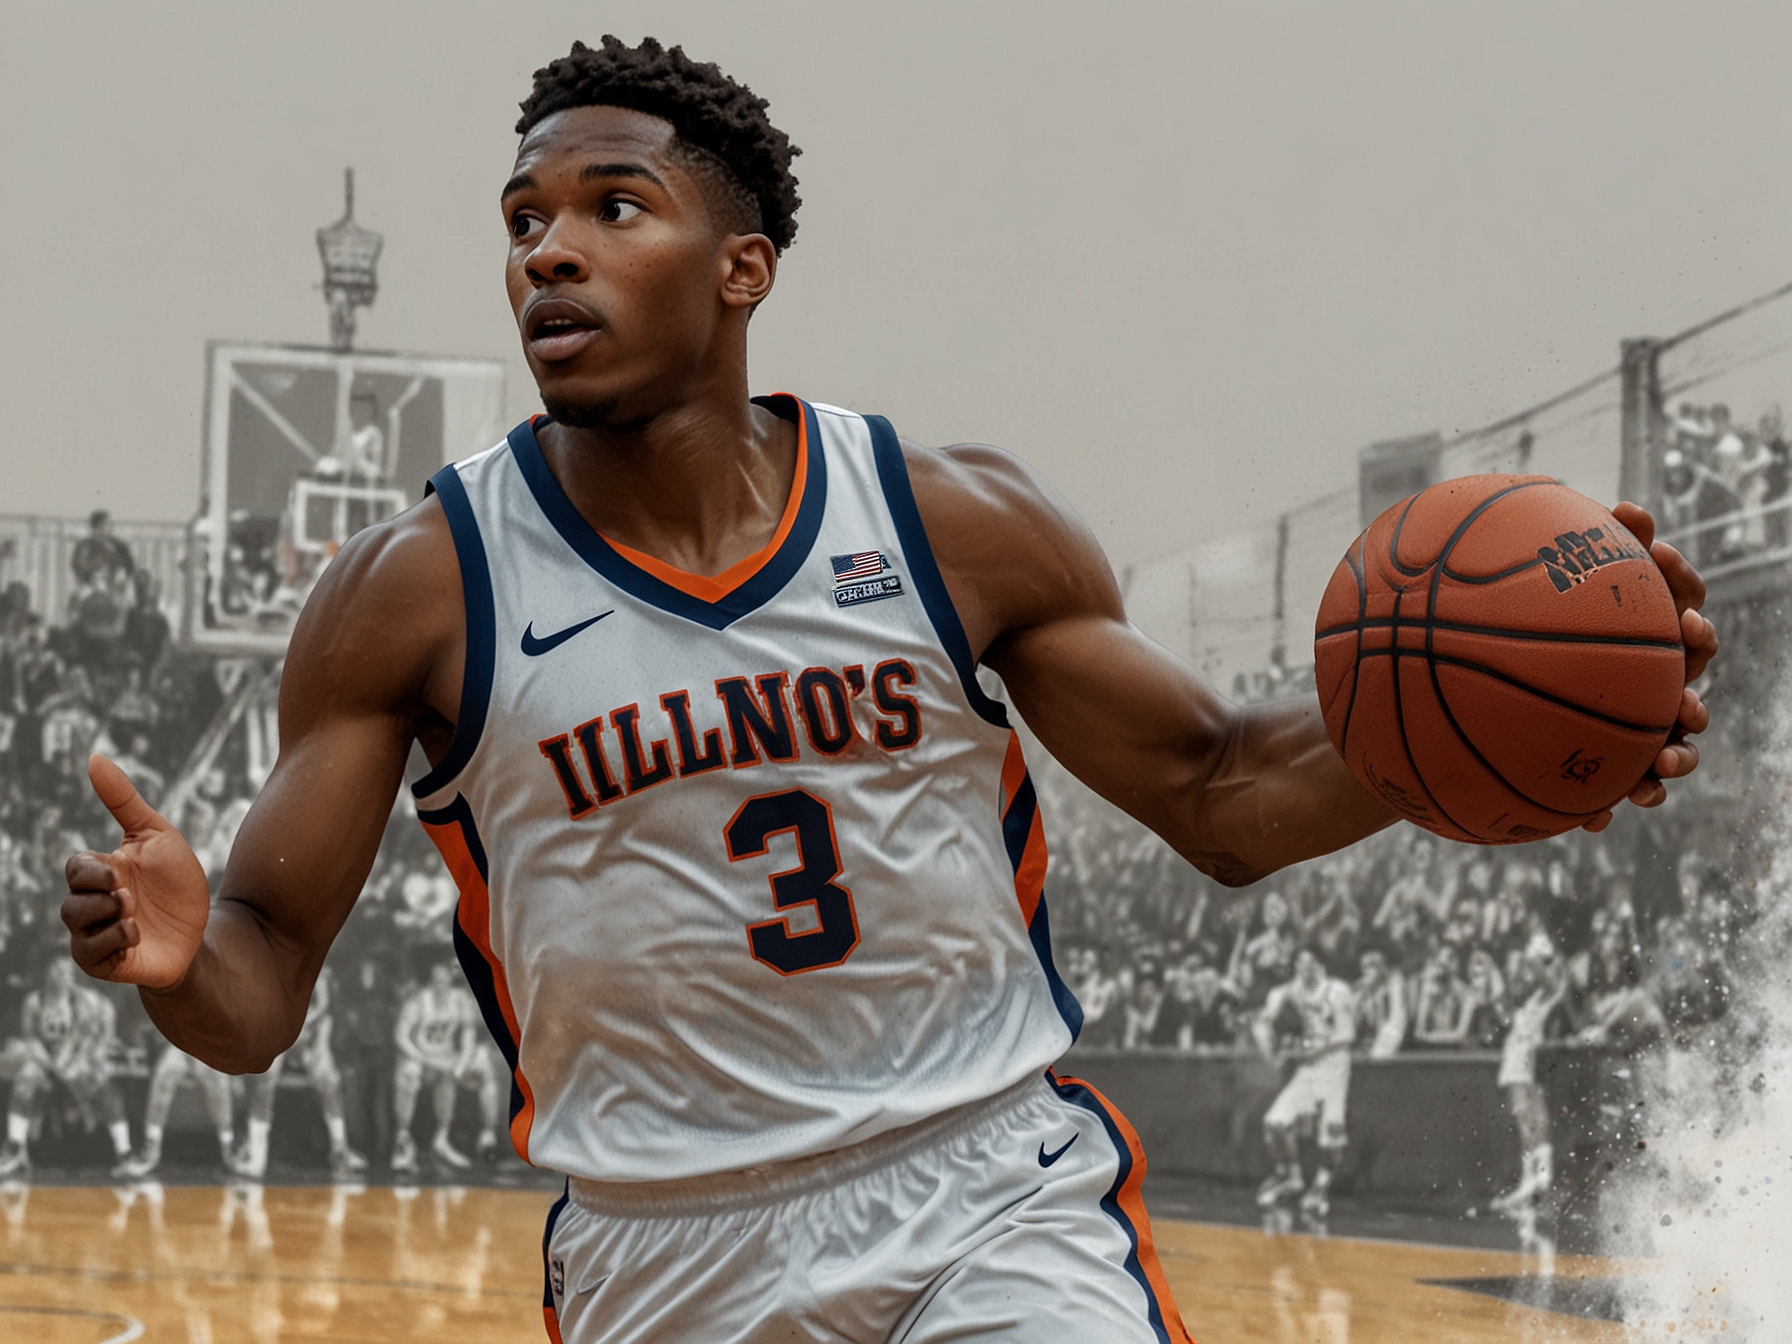 Image of Will Riley, a top 10 basketball recruit, showcasing his agility and scoring capabilities on the court. His addition to the Illinois team could significantly impact its performance and recruiting efforts.